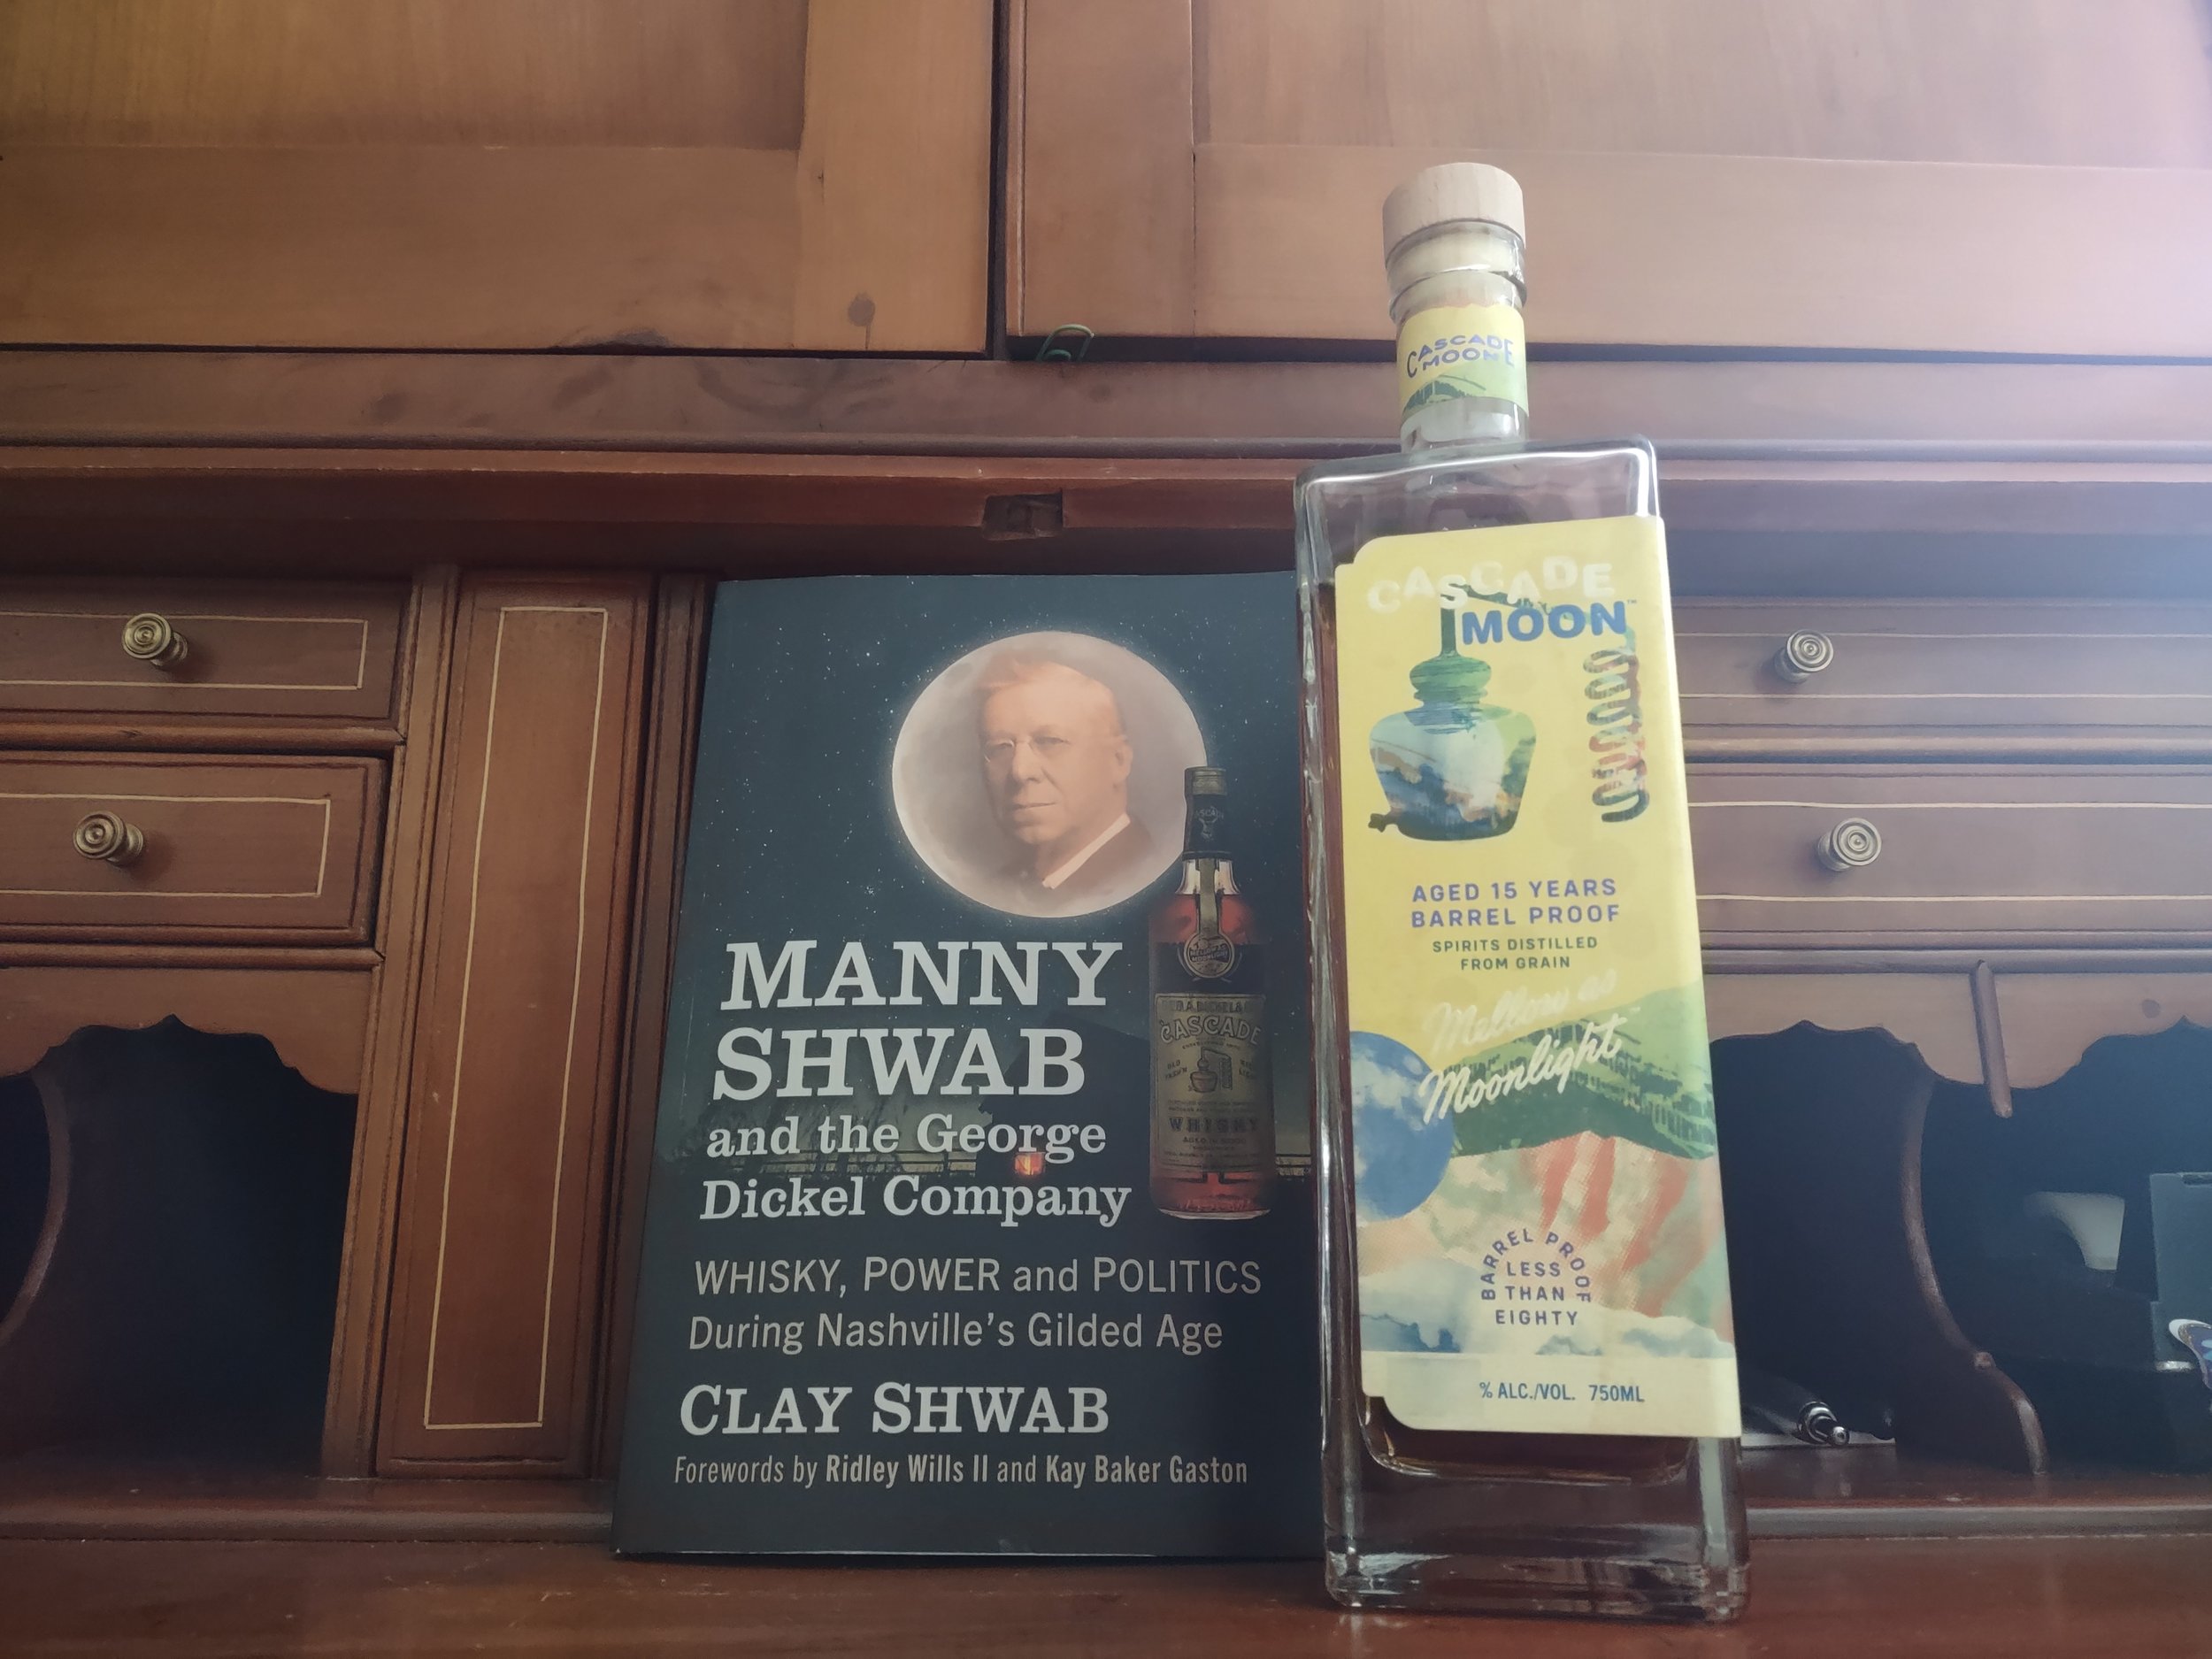 Manny Shwab and The George Dickel Company and Cascade Moon